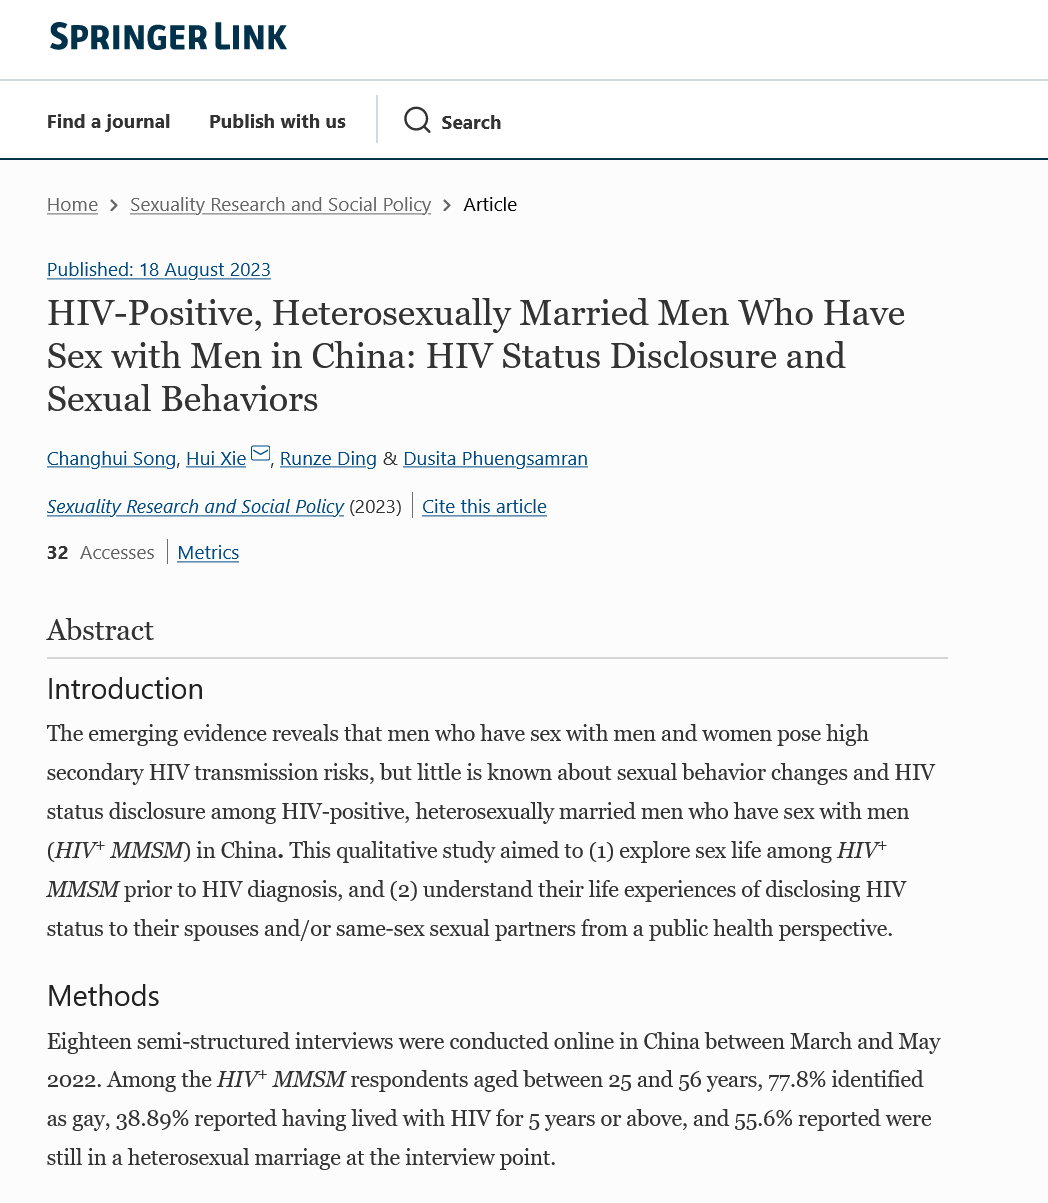 HIV-Positive, Heterosexually Married Men Who Have Sex with Men in China: HIV Status Disclosure and Sexual Behaviors